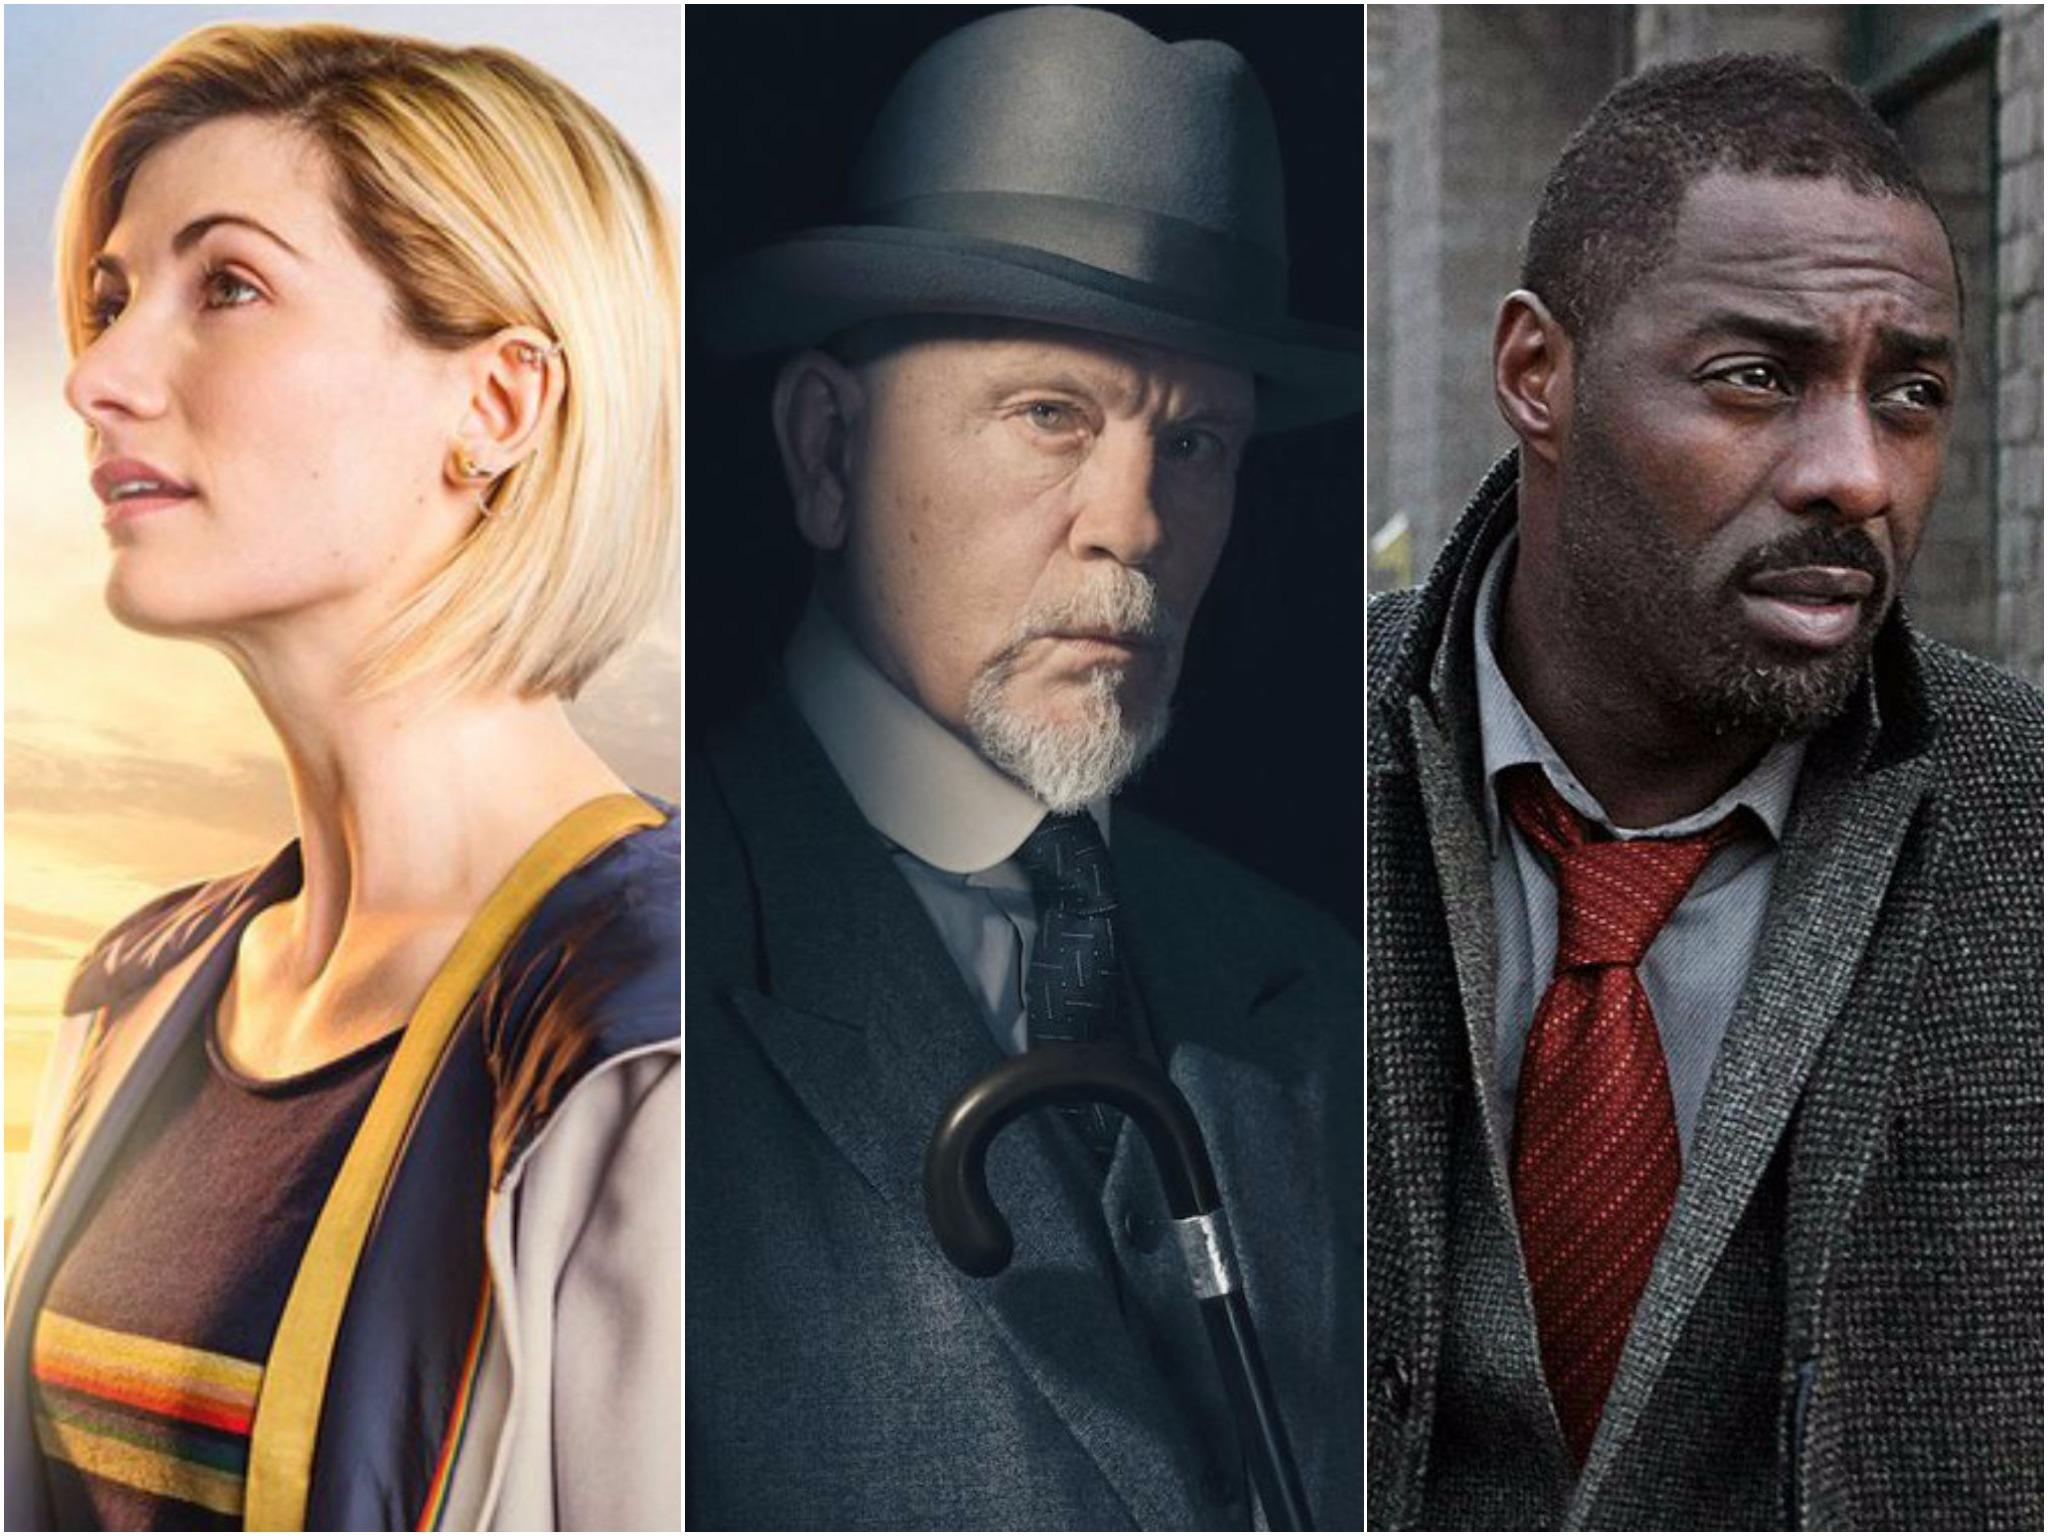 Loved Knives Out? Get Cast in a BBC Murder-Mystery + More UK Roles